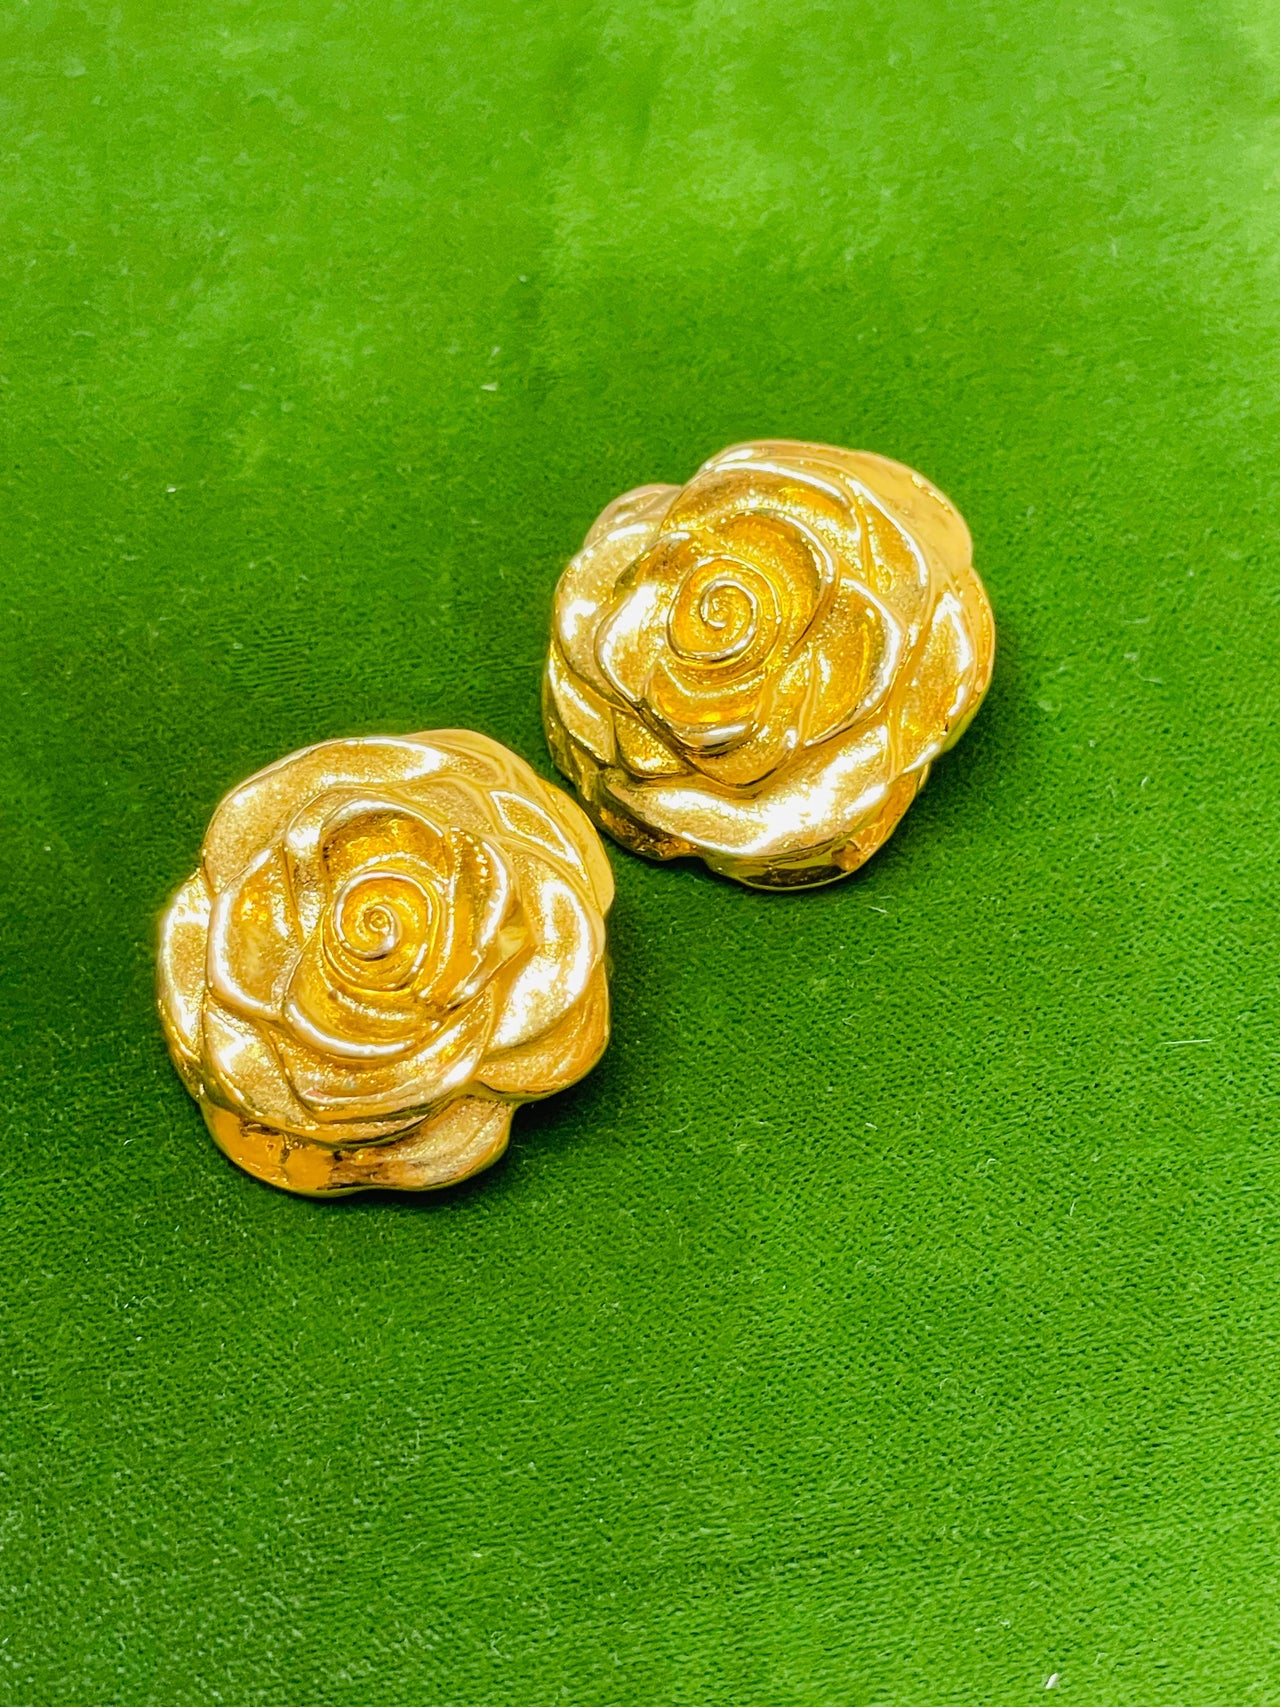 Gold Rose Necklace and Earrings Set Devil's Details 